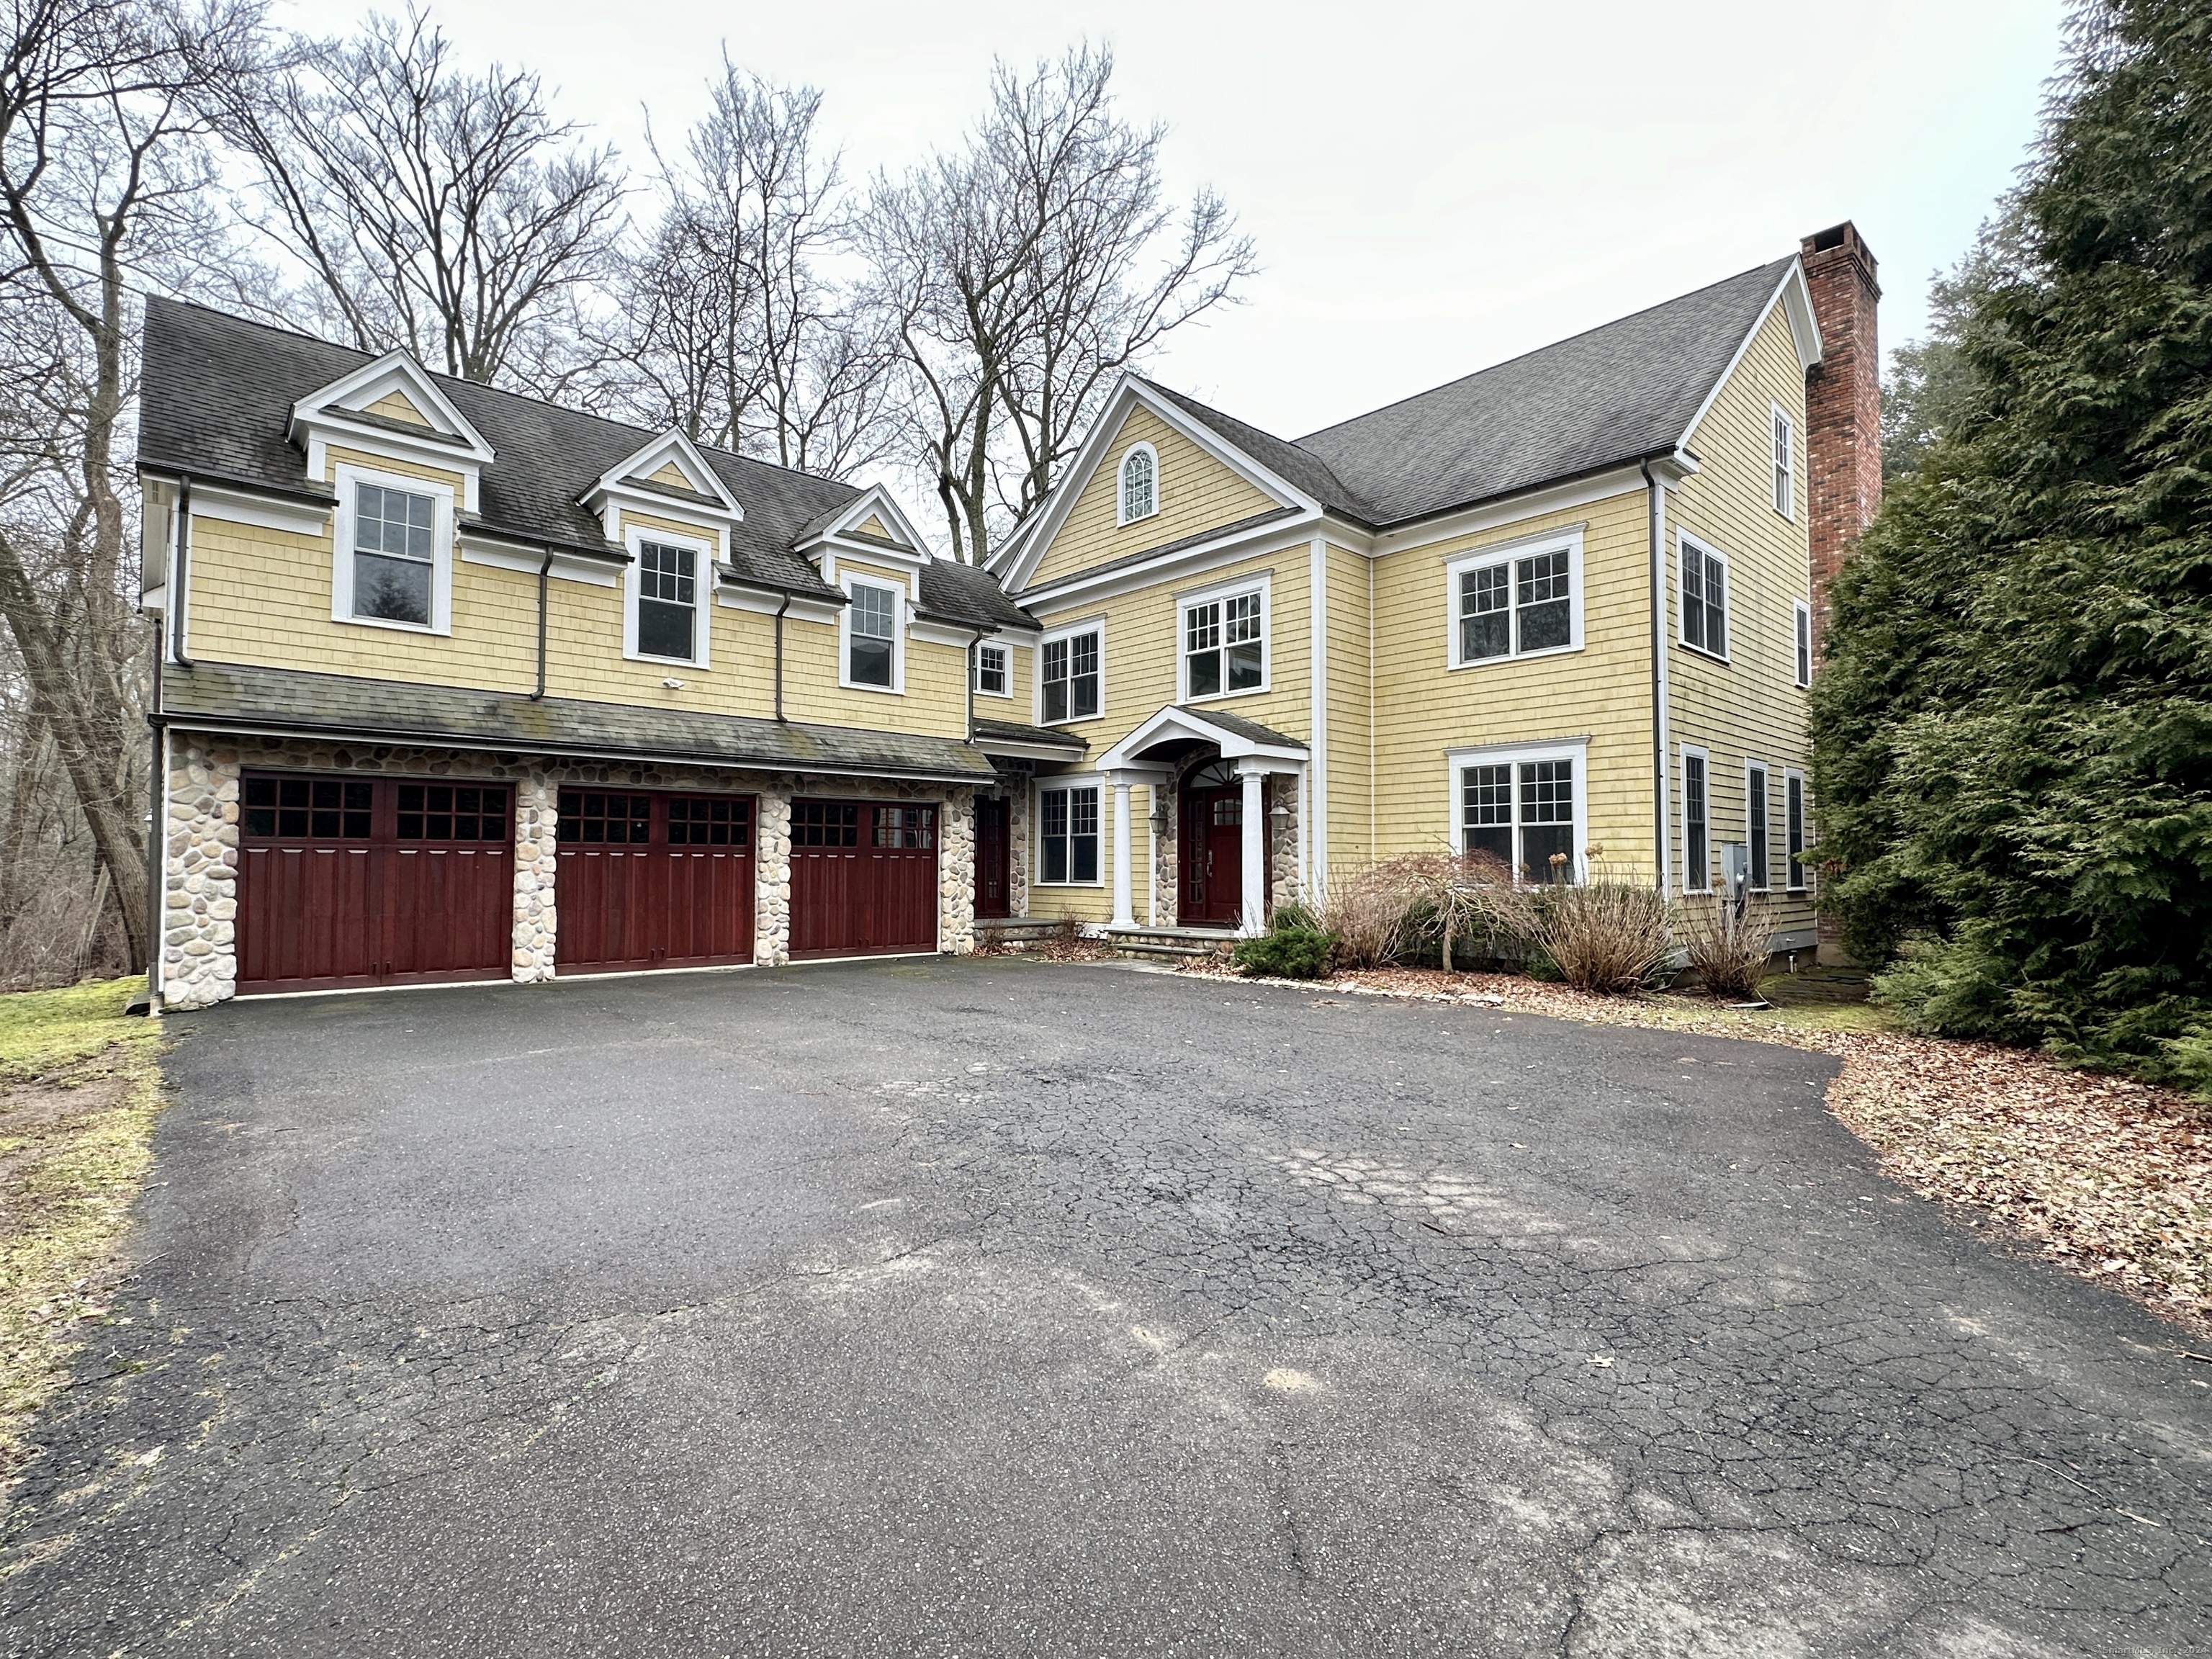 Don't miss the wonderful opportunity to own this quintessential colonial home that encapsulates the very essence of suburban living. Nestled on a highly desirable road, it seamlessly combines convenience and serenity while offering the chance to become part of a close-knit community. This 2007-built residence spans three levels, providing a generous 5,000 square feet of interior living space, ensuring ample room for your family's needs. The heart of this home is the stunning eat-in kitchen, featuring a large island, high-end appliances, and abundant storage, flowing effortlessly into the family room, perfect for relaxation and entertainment. Whether you prefer to snuggle up in front of the wood-burning fireplace in the living room or indulge in formal dining, this home caters to your desires. Step outside to enjoy private indoor-outdoor living on the tucked away patio just off the kitchen, ideal for dining and relaxation. The primary suite offers a personal sanctuary with a walk-in closet and ensuite bath, and three more spacious bedrooms provide individual retreats for everyone. The lower level offers added flexibility with an unfinished basement and a full bathroom, allowing you to customize the space to your liking. With NYC less than 50 miles away and a nearby train station, commuting is a breeze. Don't miss out on this exceptional suburban gem.